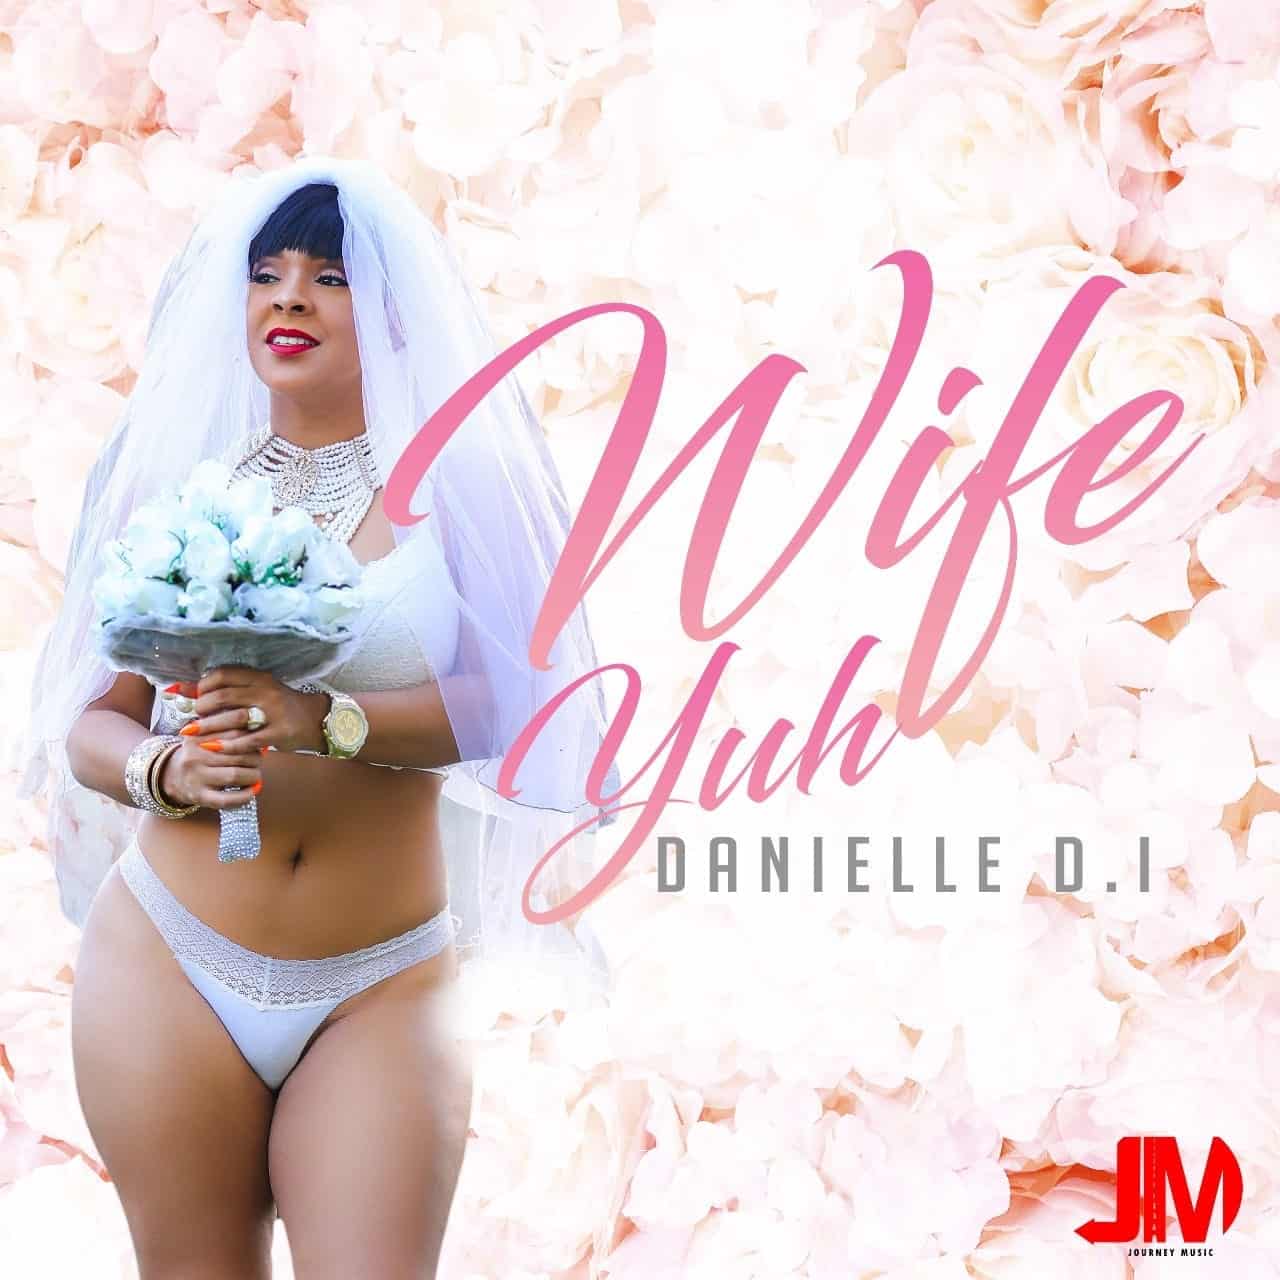 Danielle D.I. - Wife Yuh - Journey Music - Raw